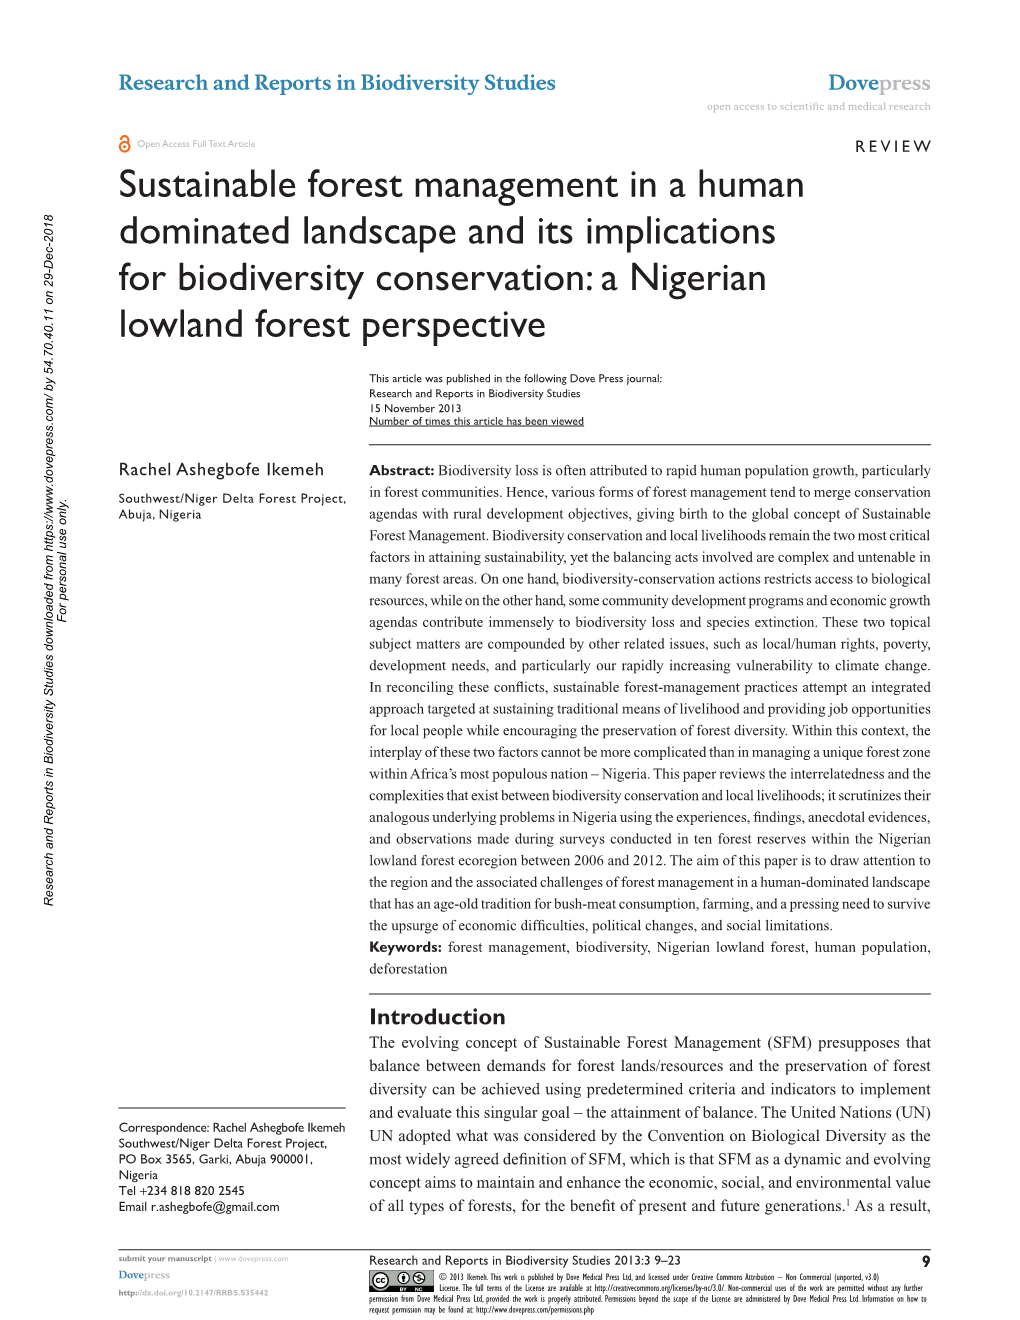 Sustainable Forest Management in a Human Dominated Landscape and Its Implications for Biodiversity Conservation: a Nigerian Lowland Forest Perspective